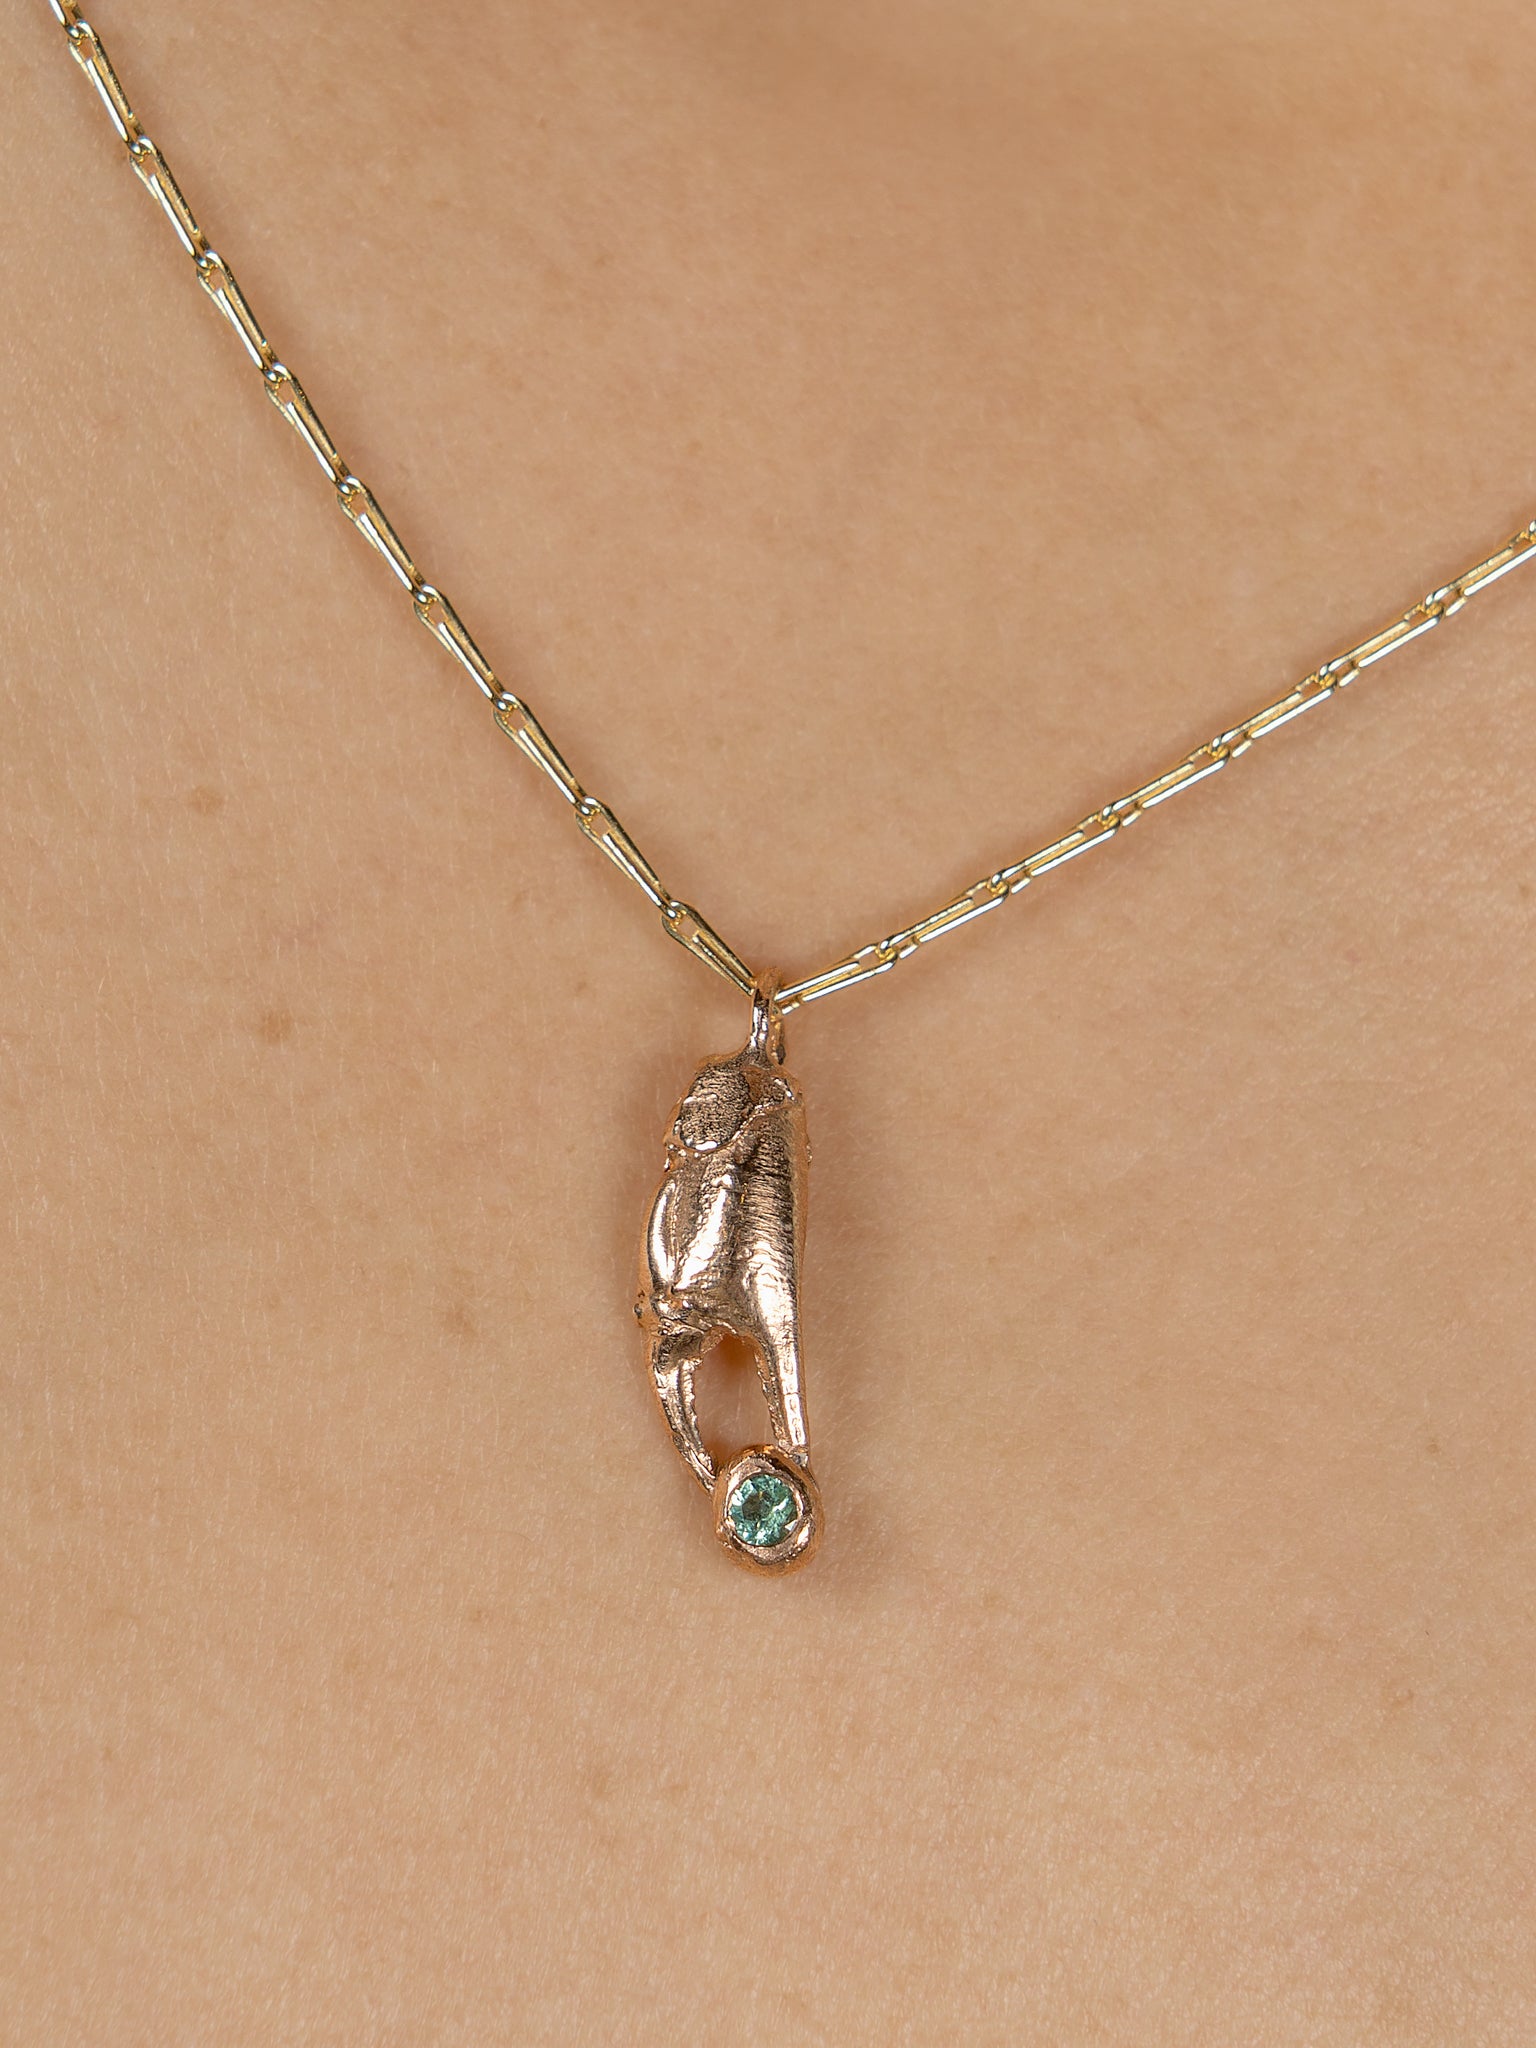 Red gold crab claw on a yellow gold chain holding green tourmaline gemstone which is Fairtrade.  Shown close up on skin.